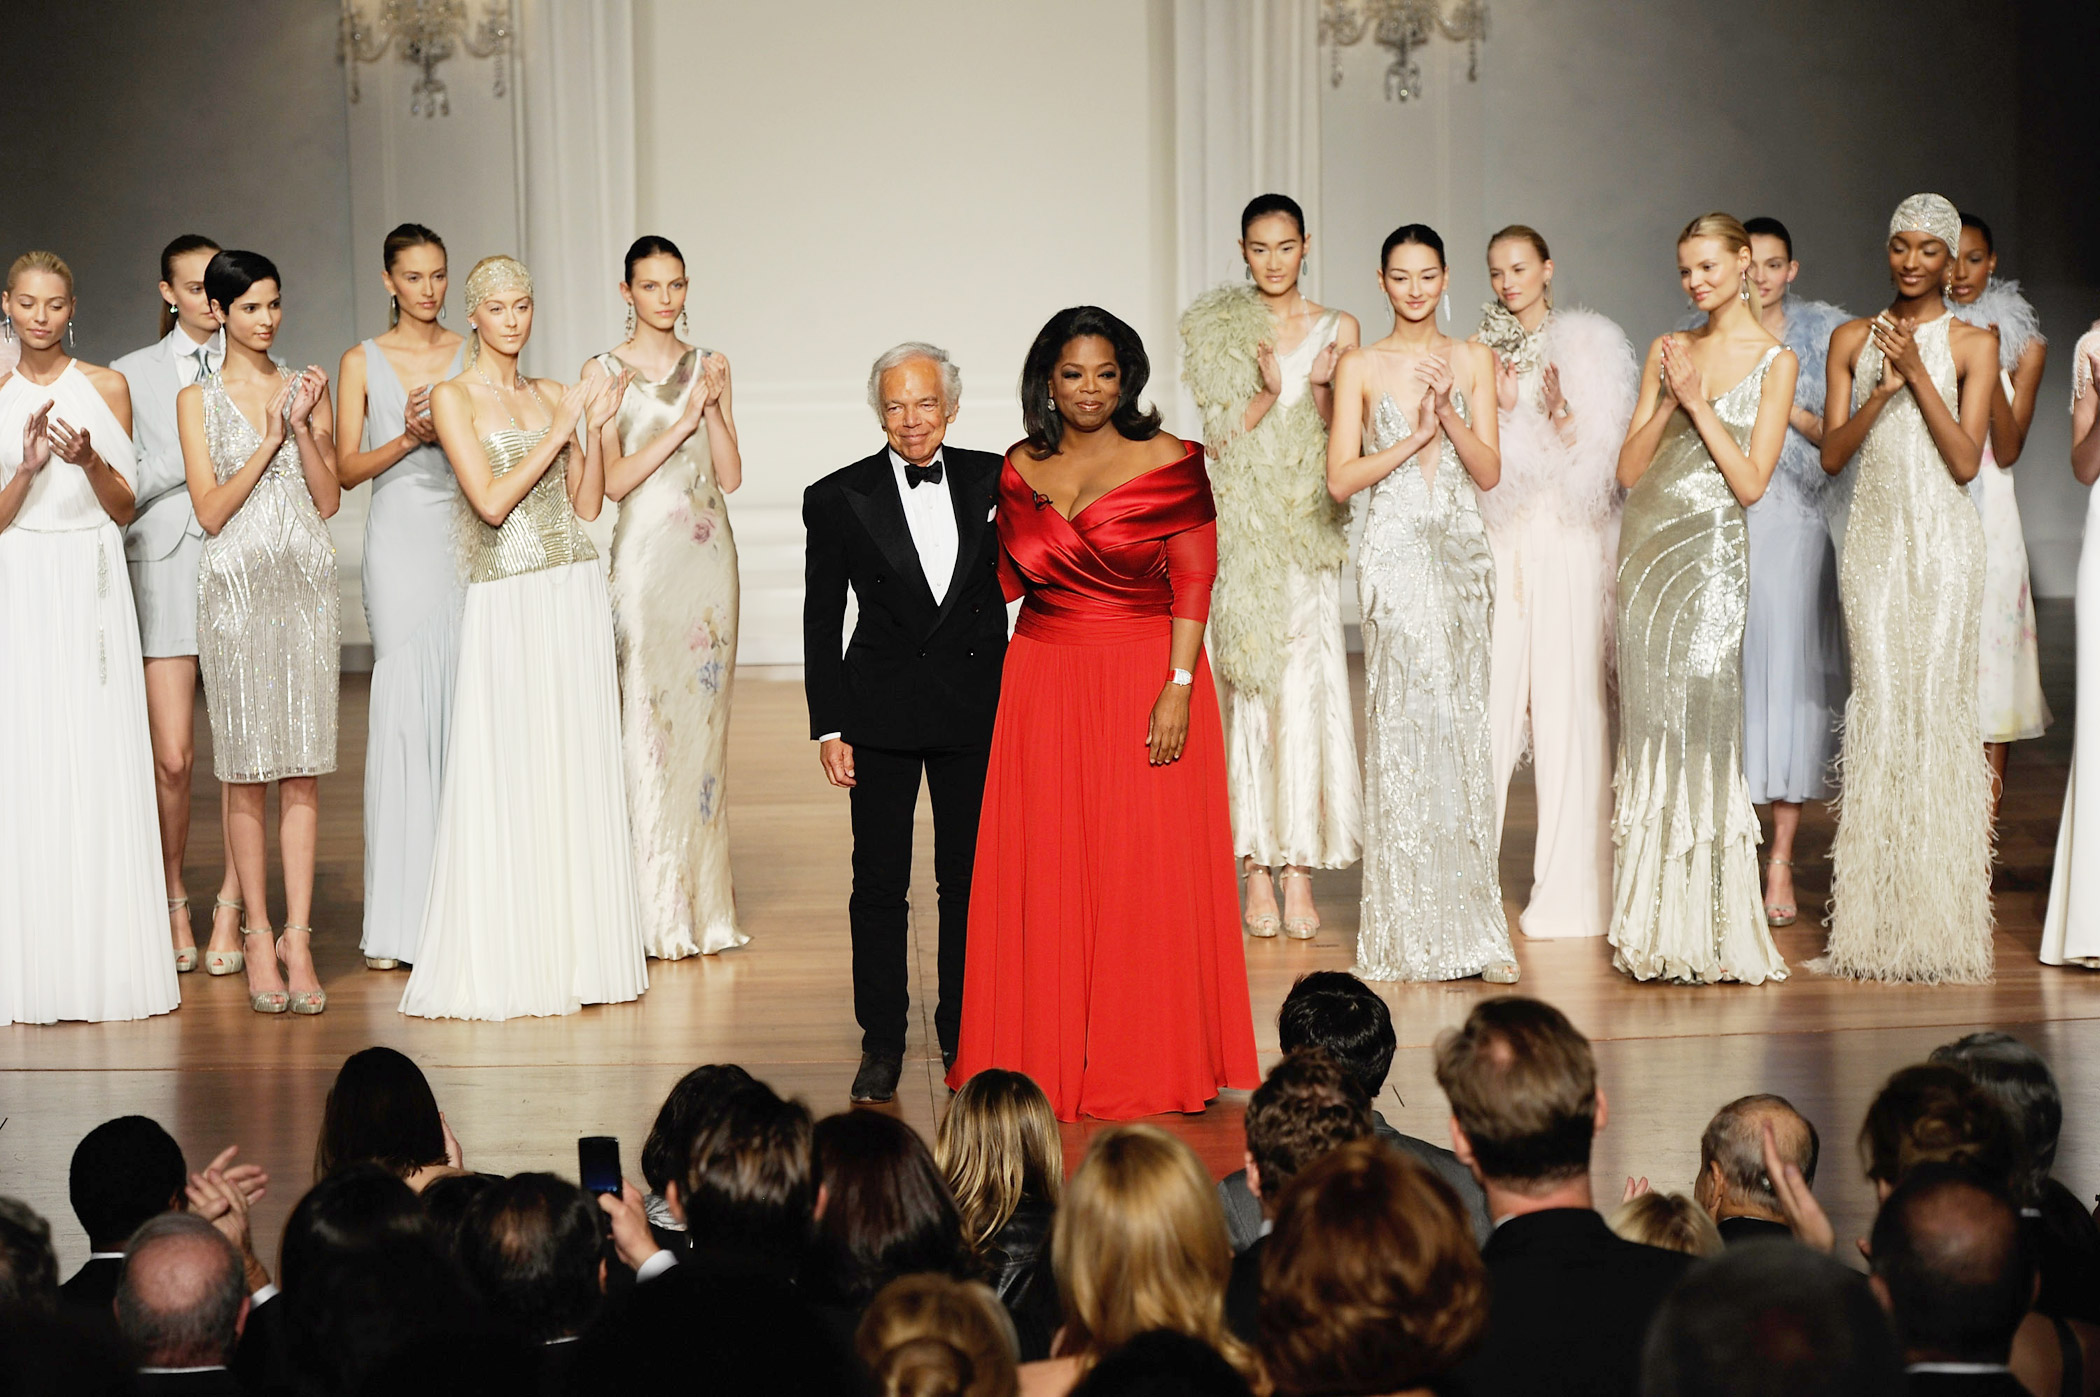 Ralph Lauren and Oprah Winfrey at an evening with Ralph Lauren presented at Lincoln Center on Oct. 24, 2011 in New York City.